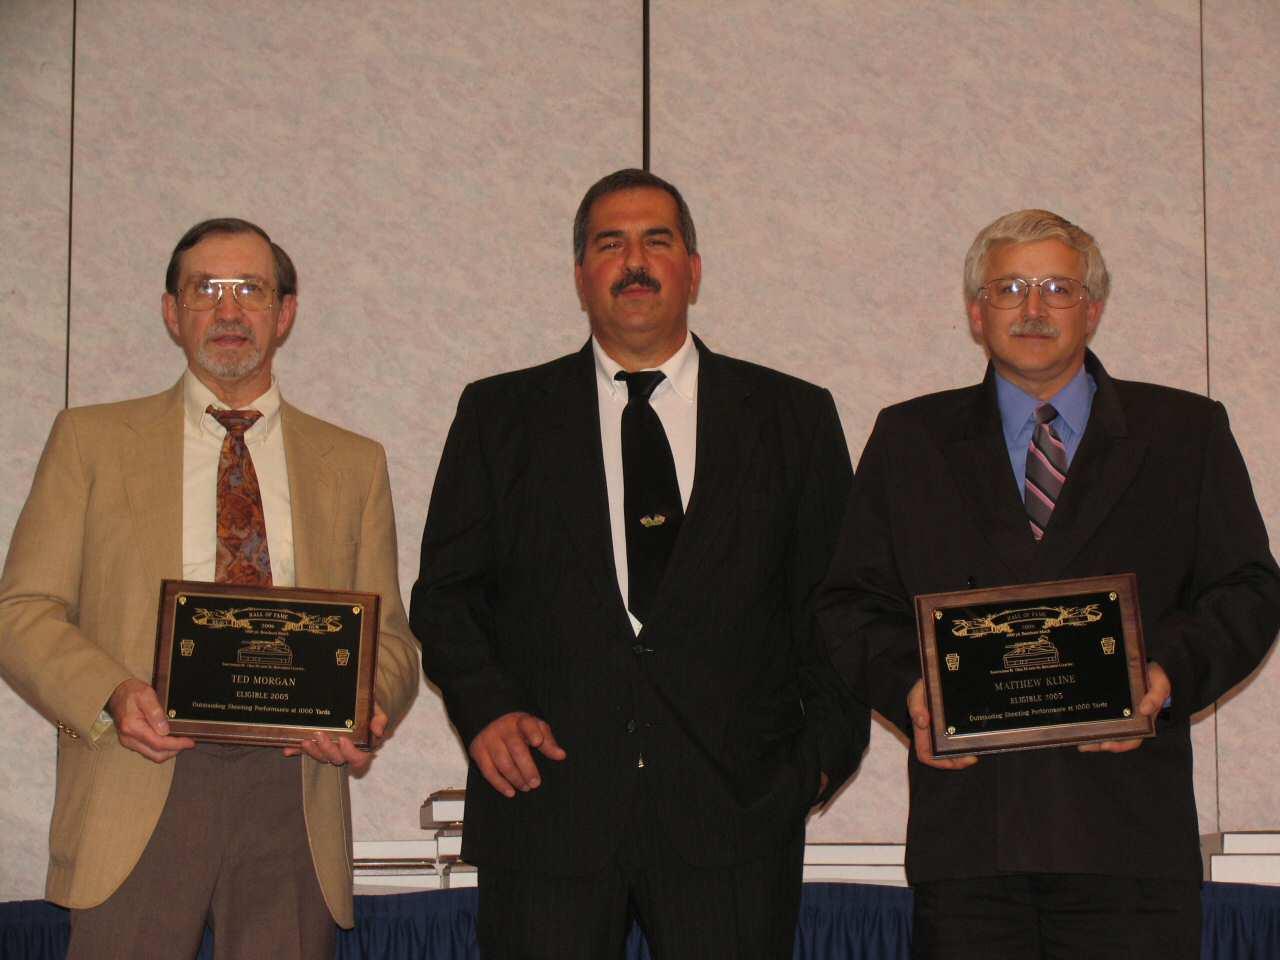 Heavy Gun Hall of Fame Inductees